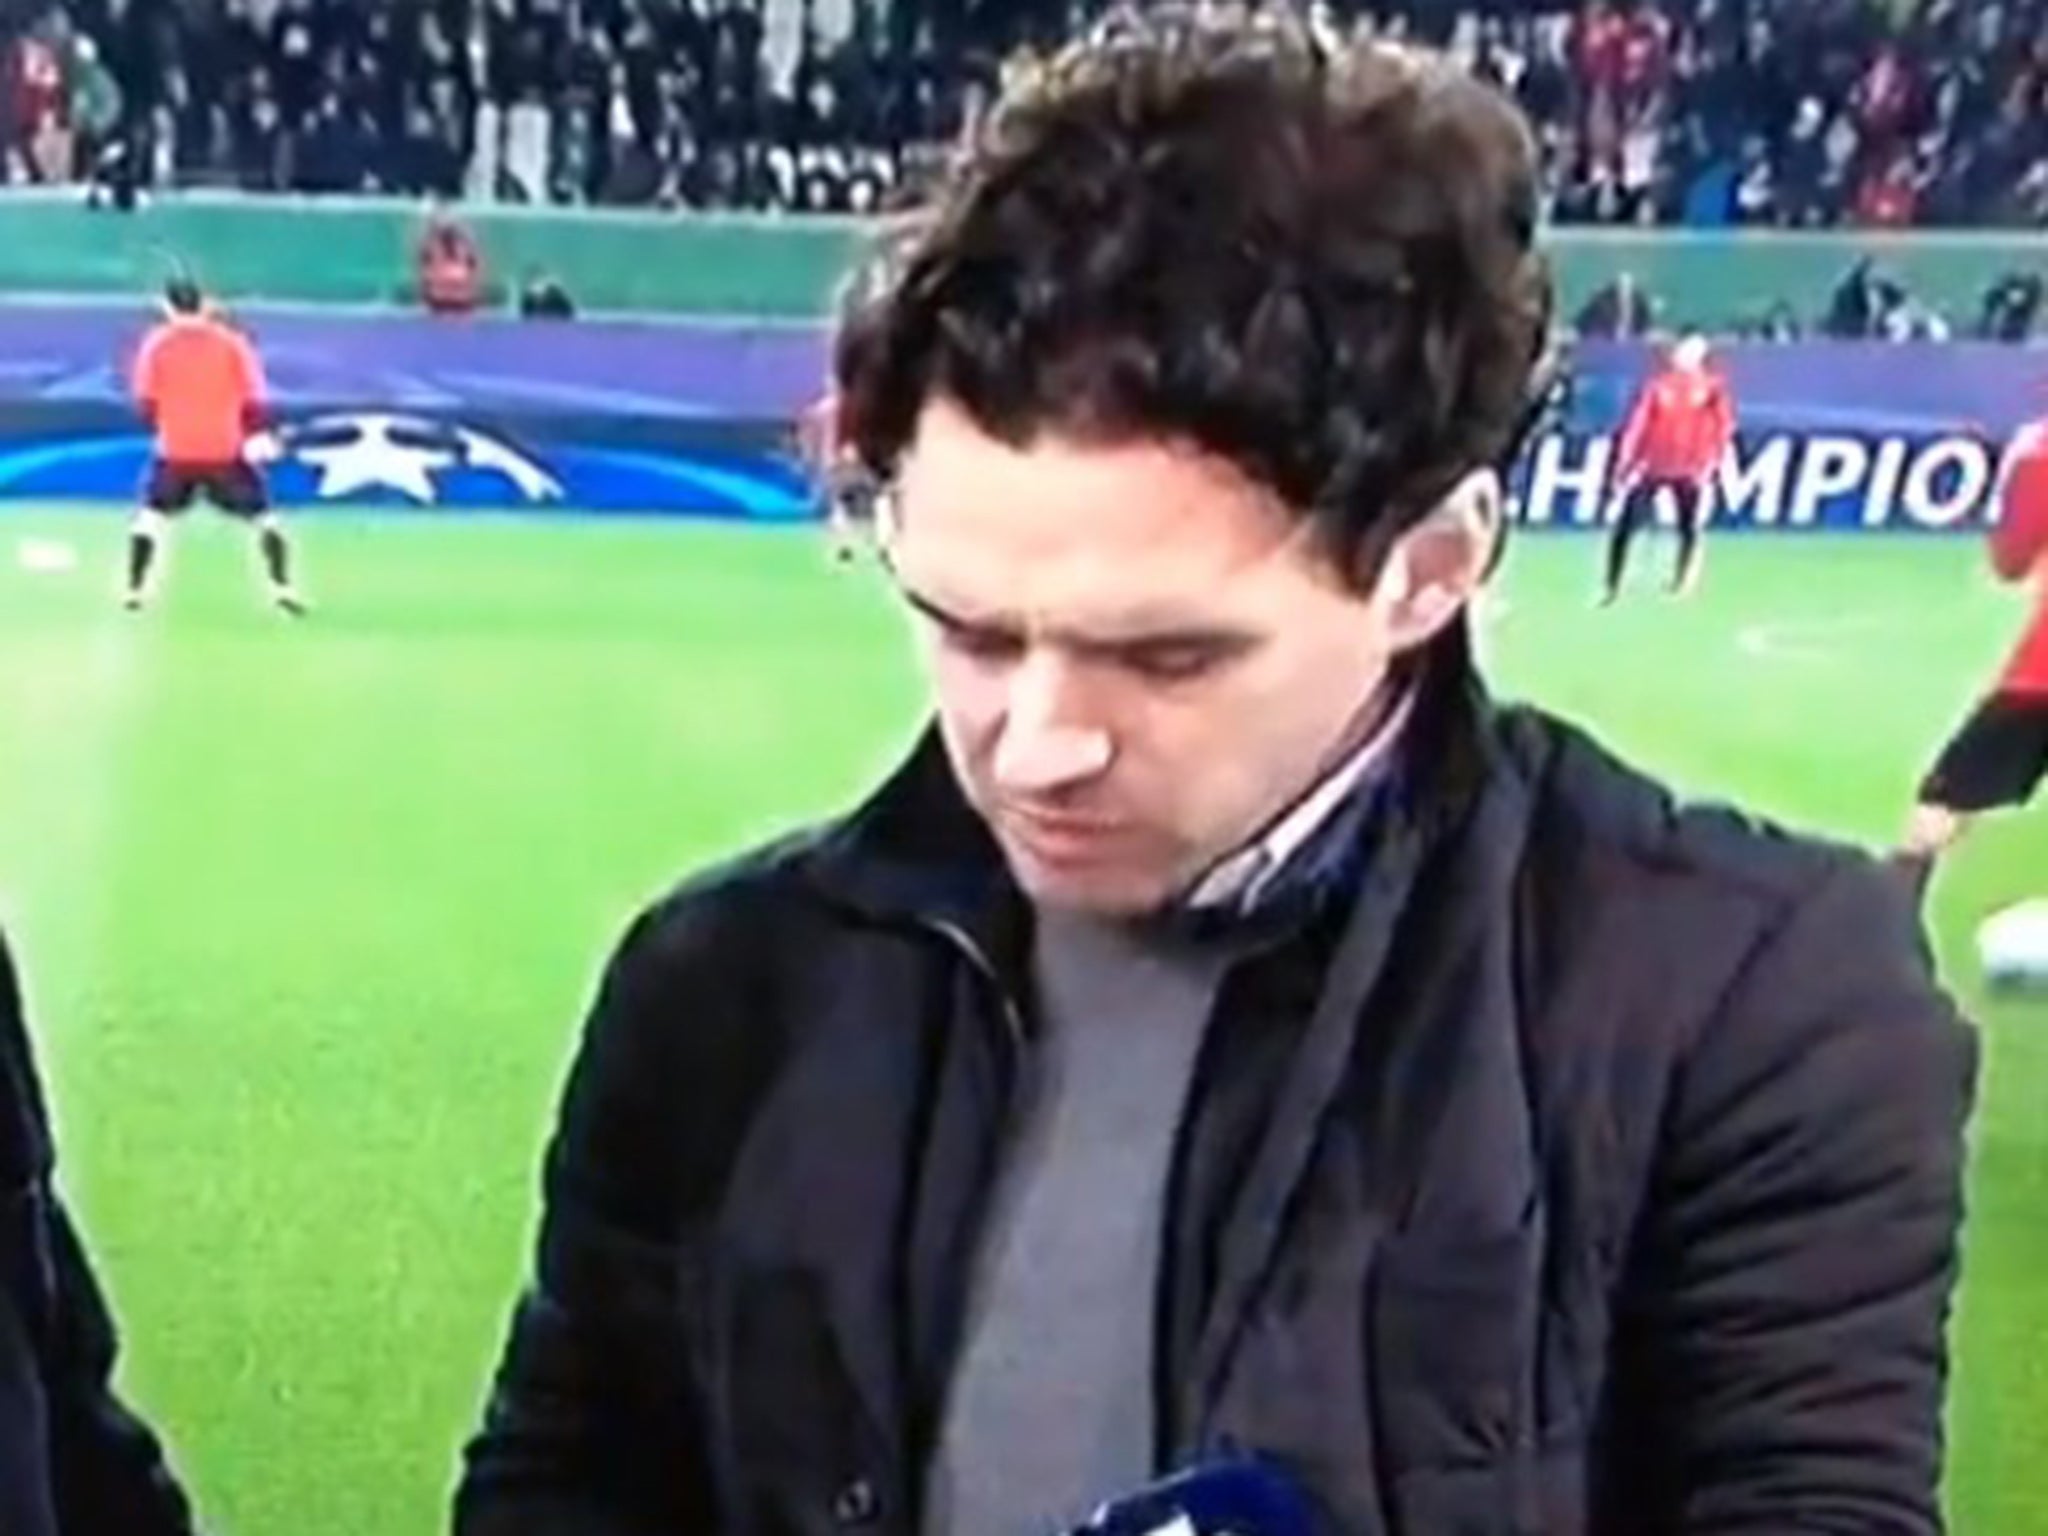 Owen Hargreaves on BT Sport before the game